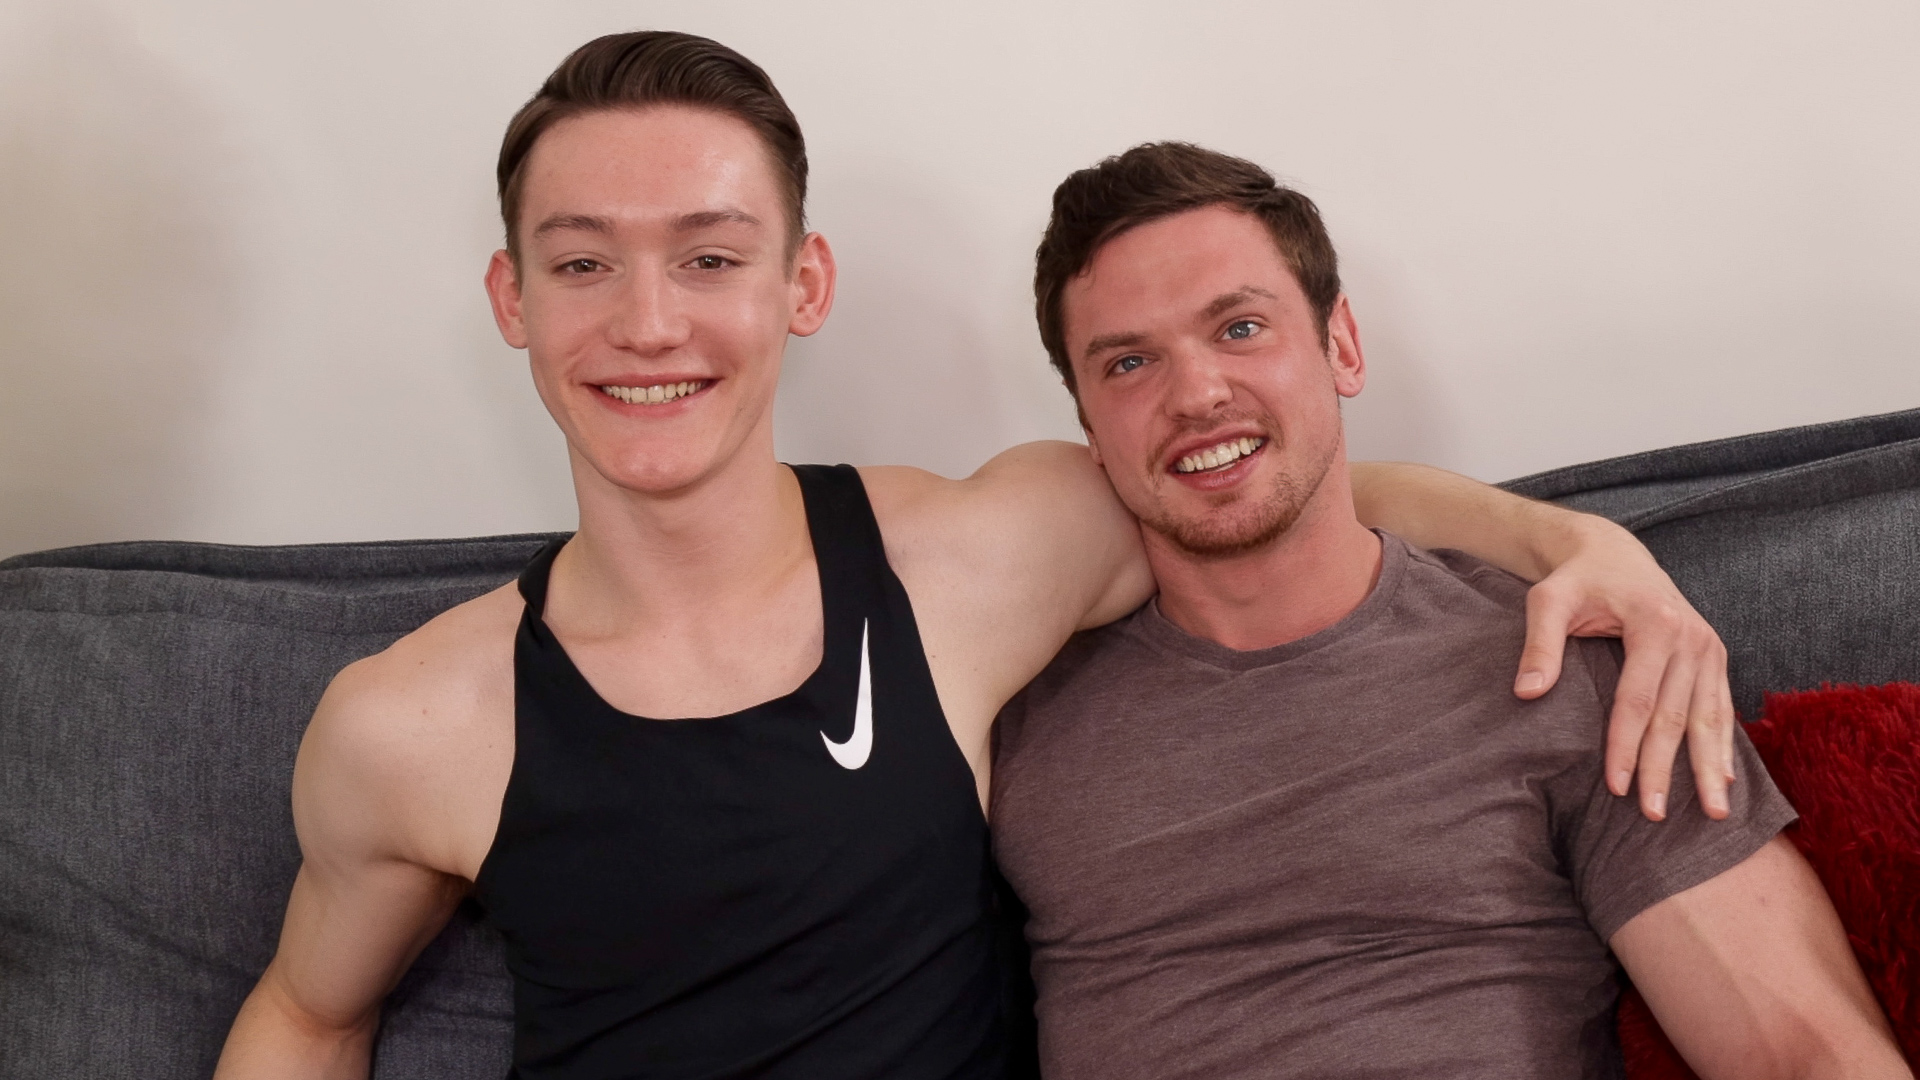 Kingsley Kross Gears Up For Andy McBride's Big Fat Cock